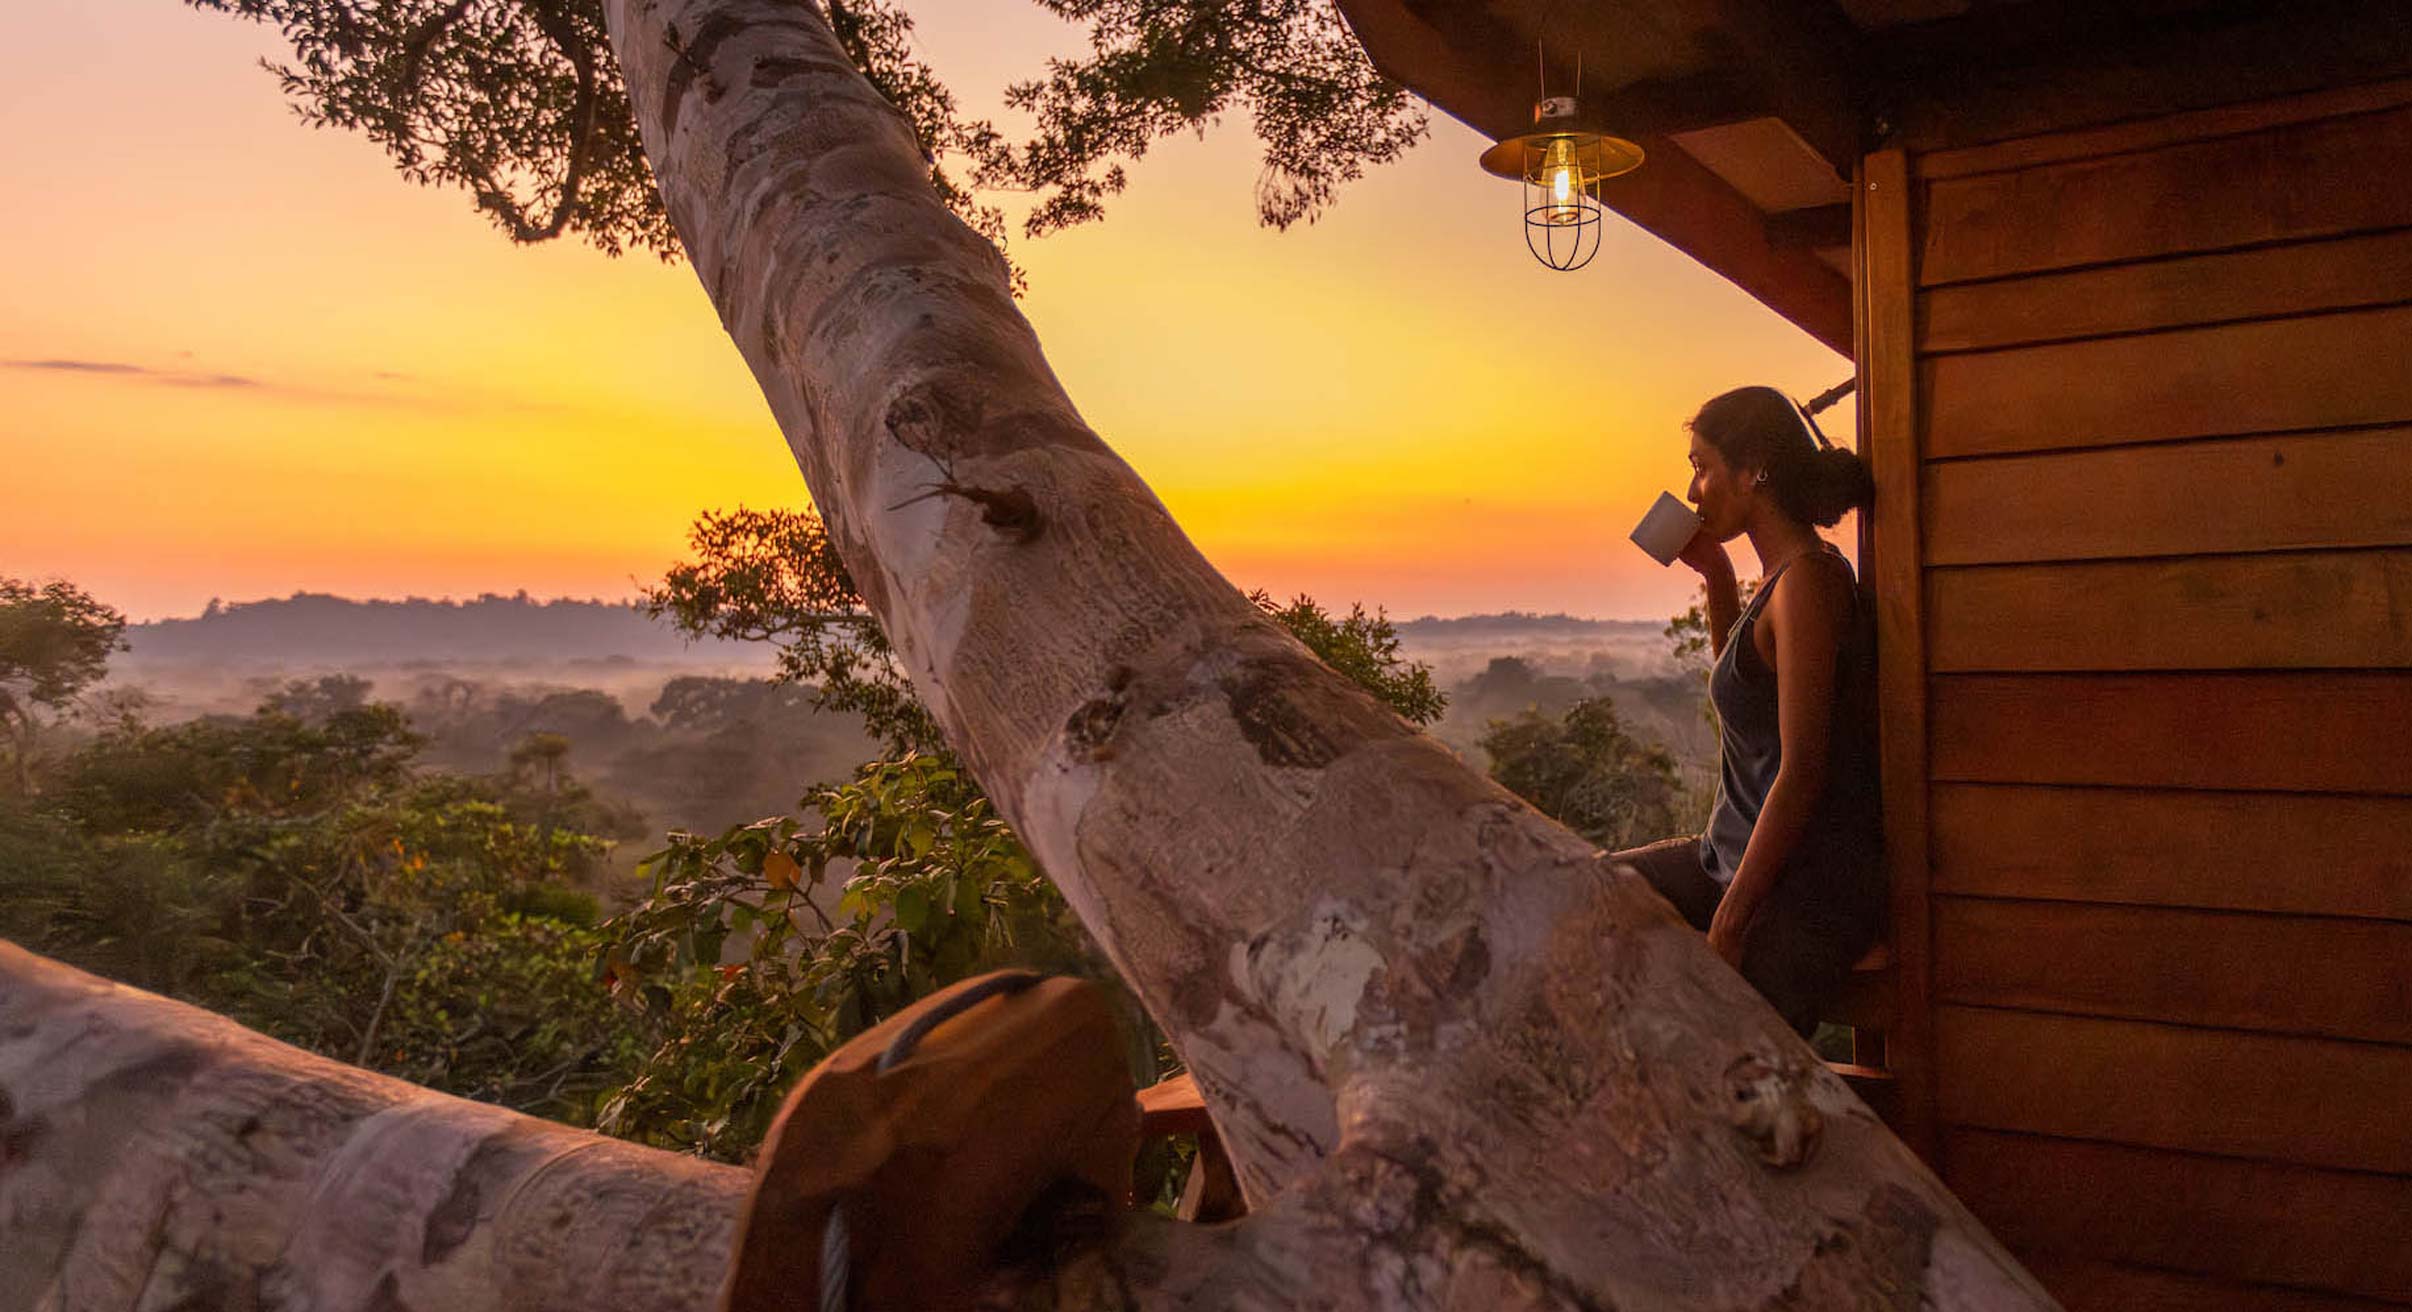 Morning coffee at Alta Sanctuary treehouse in Amazon Rainforest in Peru